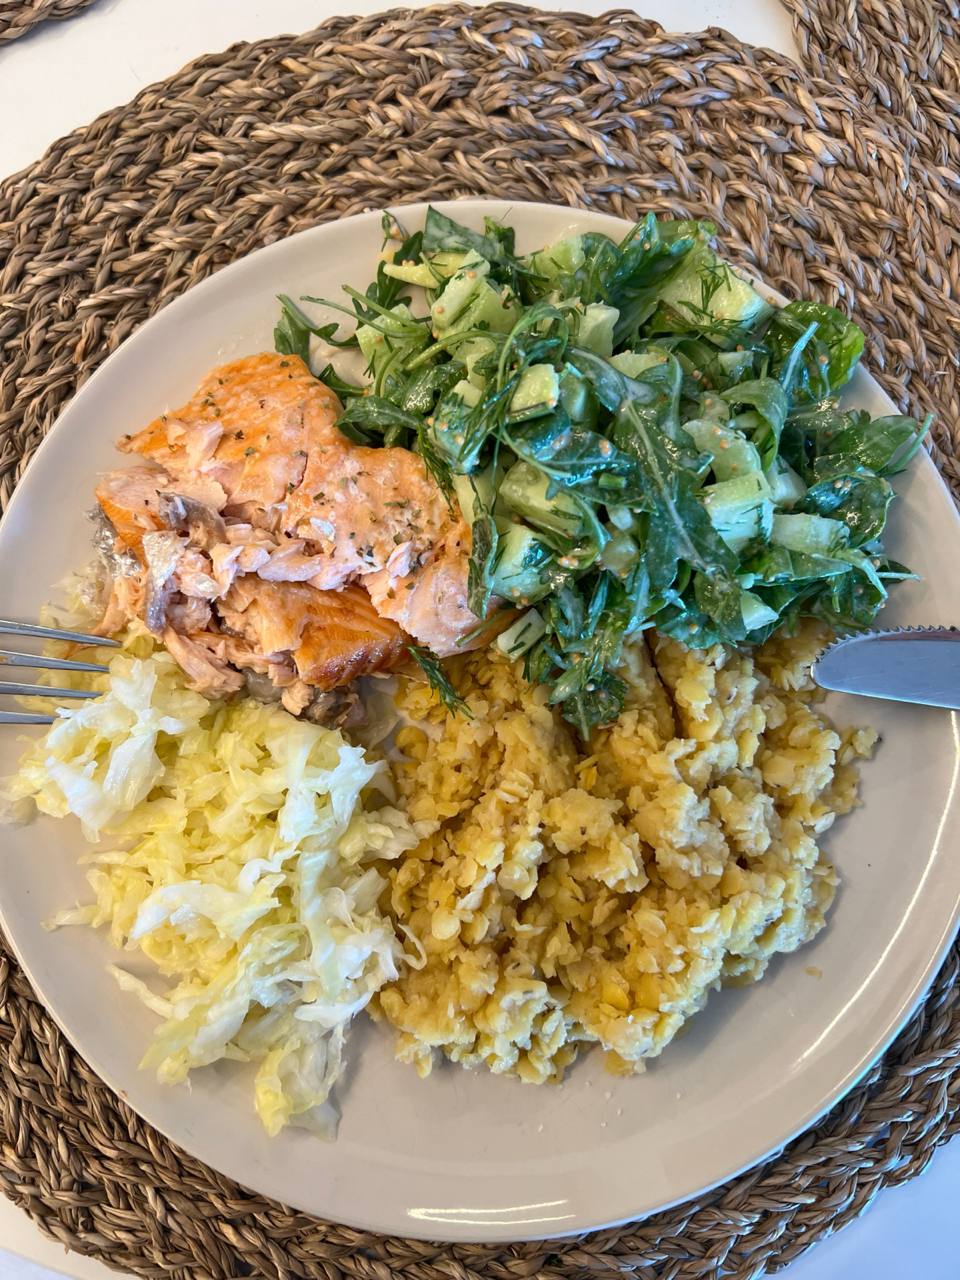 Mixed Meal With Salmon, Salad, And Mashed Legume/vegetable